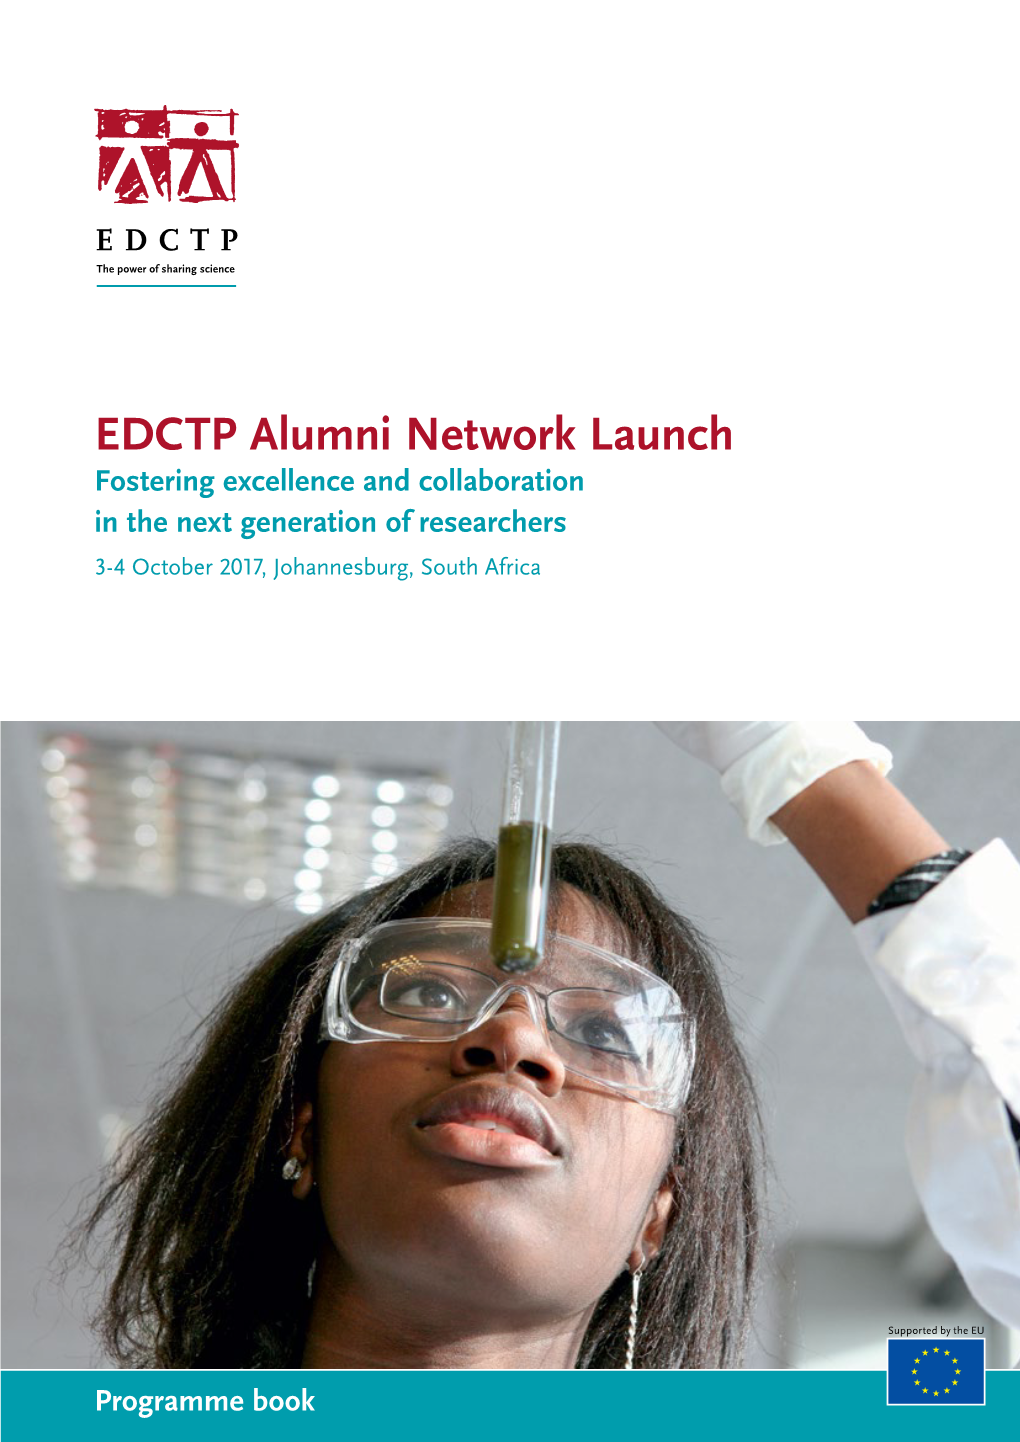 EDCTP Alumni Network Launch Fostering Excellence and Collaboration in the Next Generation of Researchers 3-4 October 2017, Johannesburg, South Africa